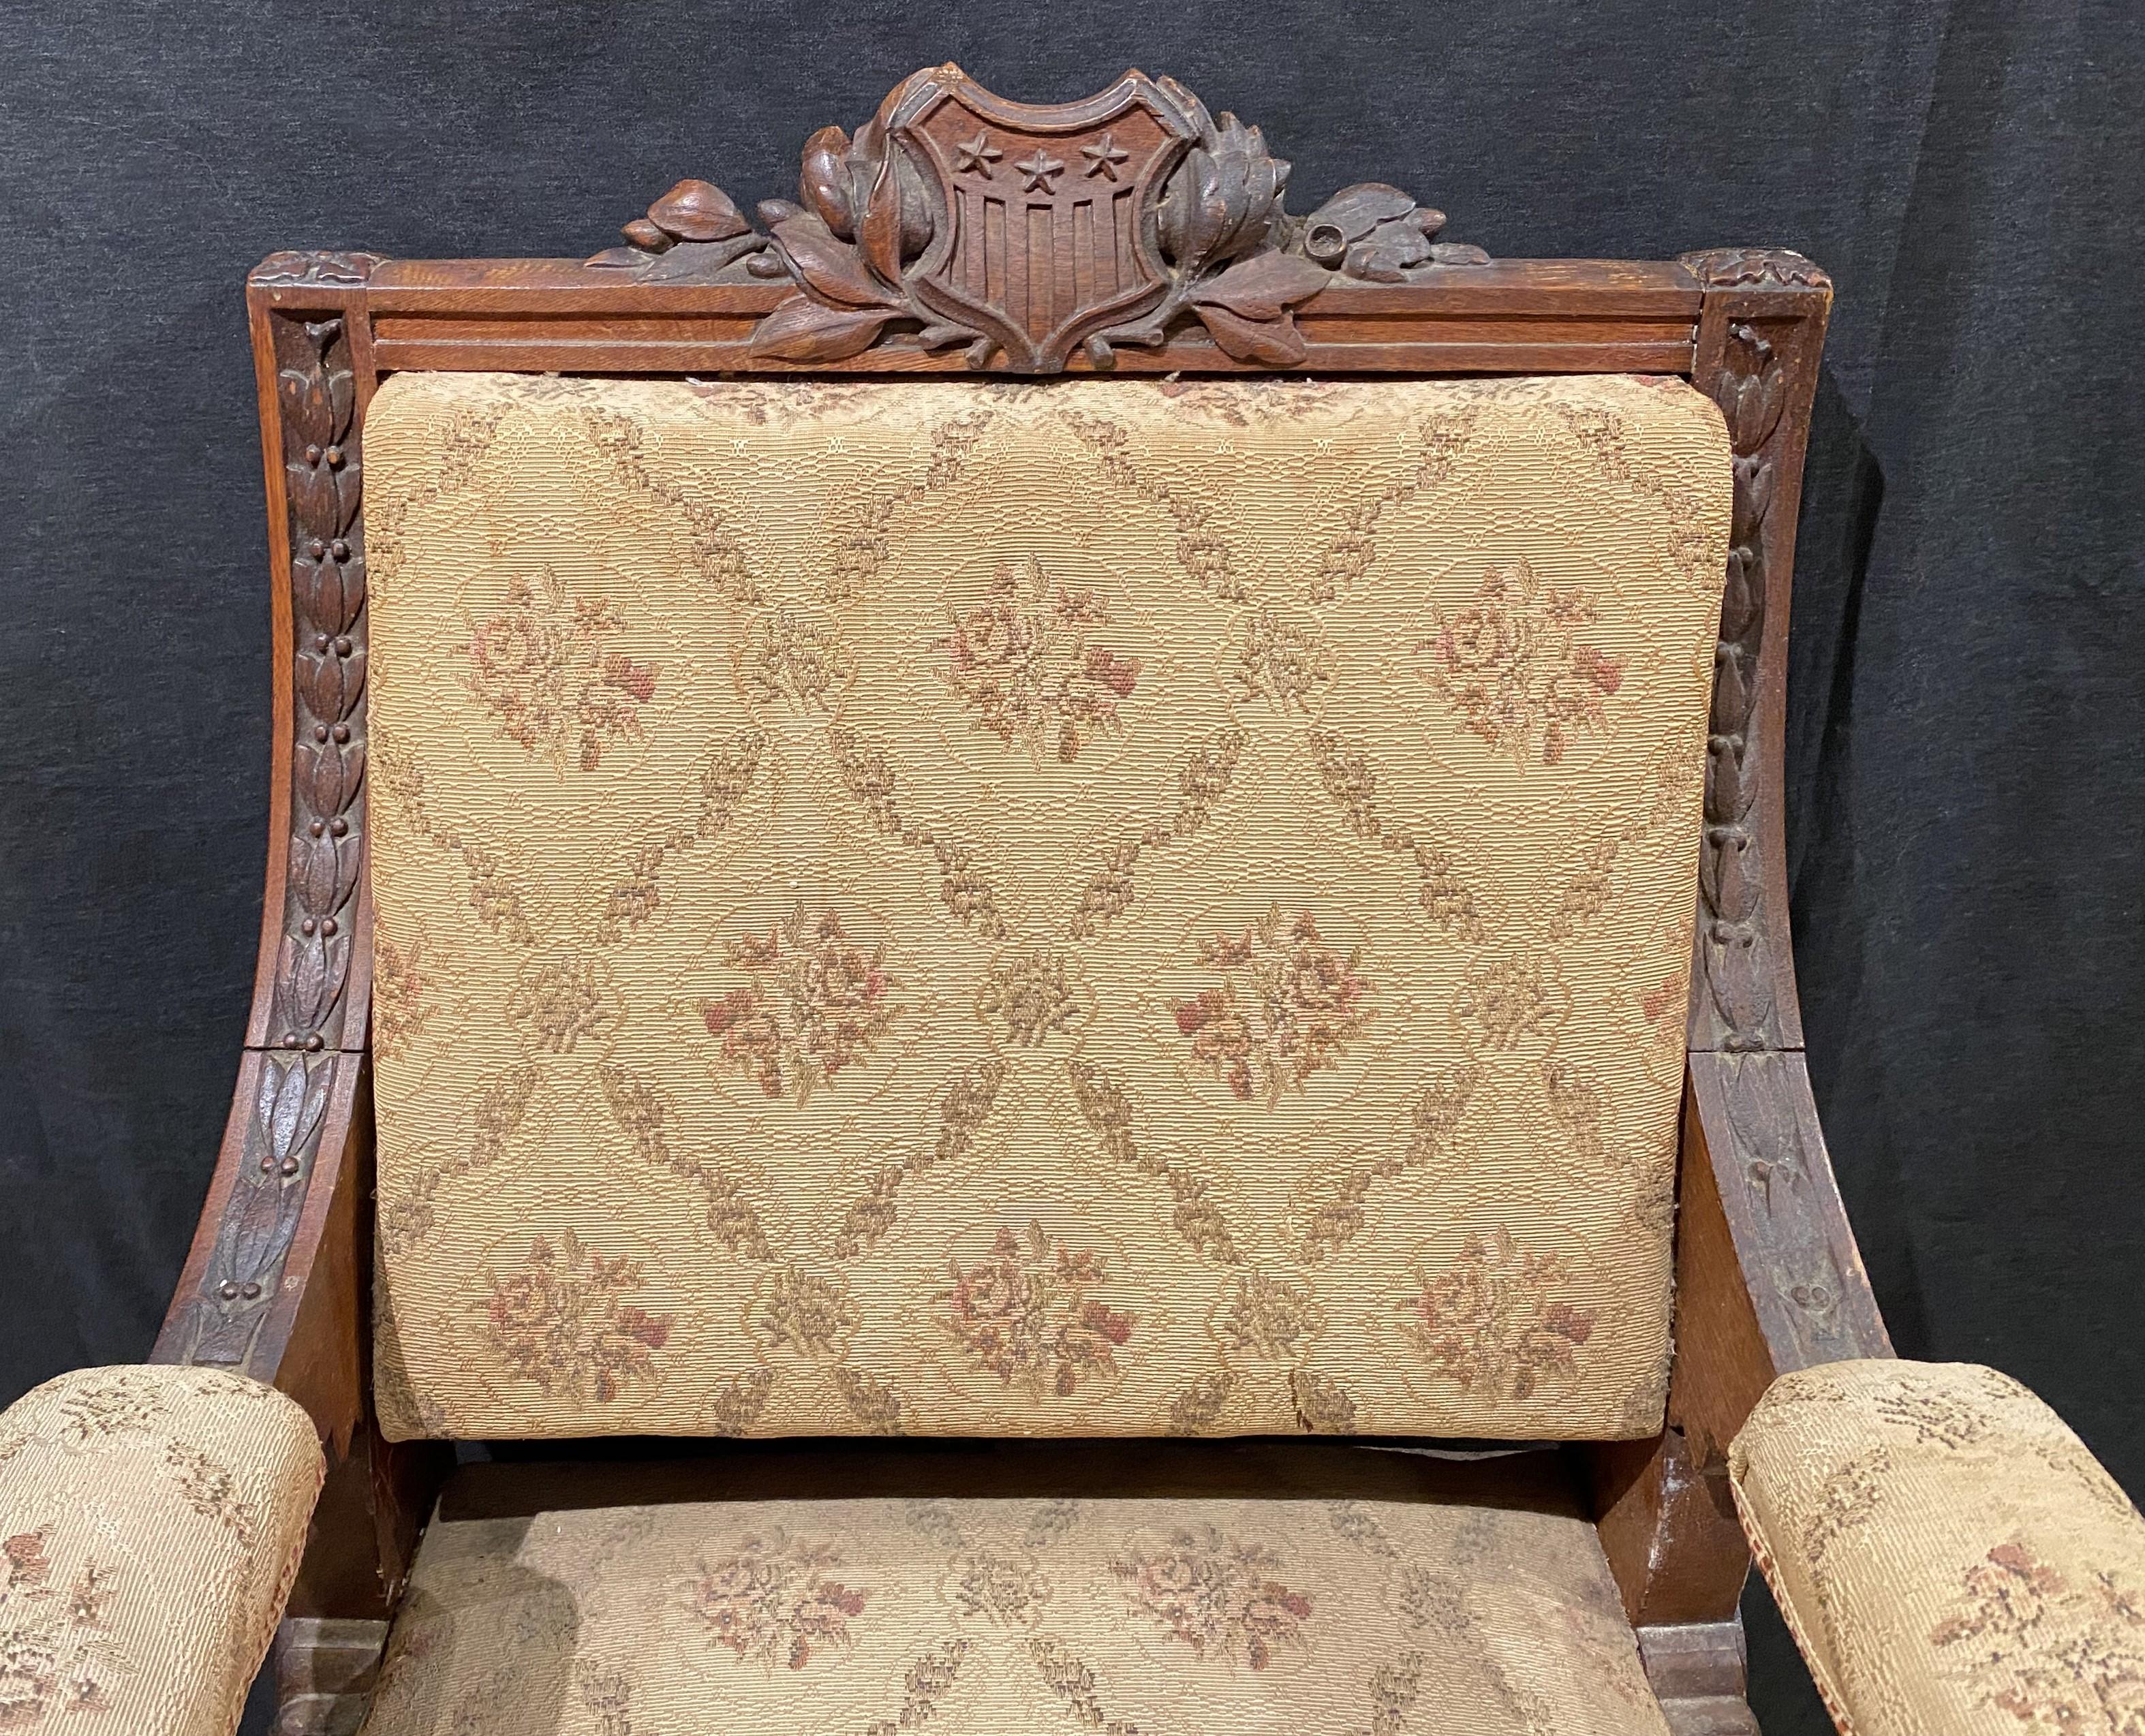 A beautifully detailed carved and upholstered oak US Senate armchair belonging to Person C. Cheney (1828-1901), the  44th New Hampshire Governor and US Senator. Person was born in Holderness, NH, educated at the academies at Parsonfield, Maine and